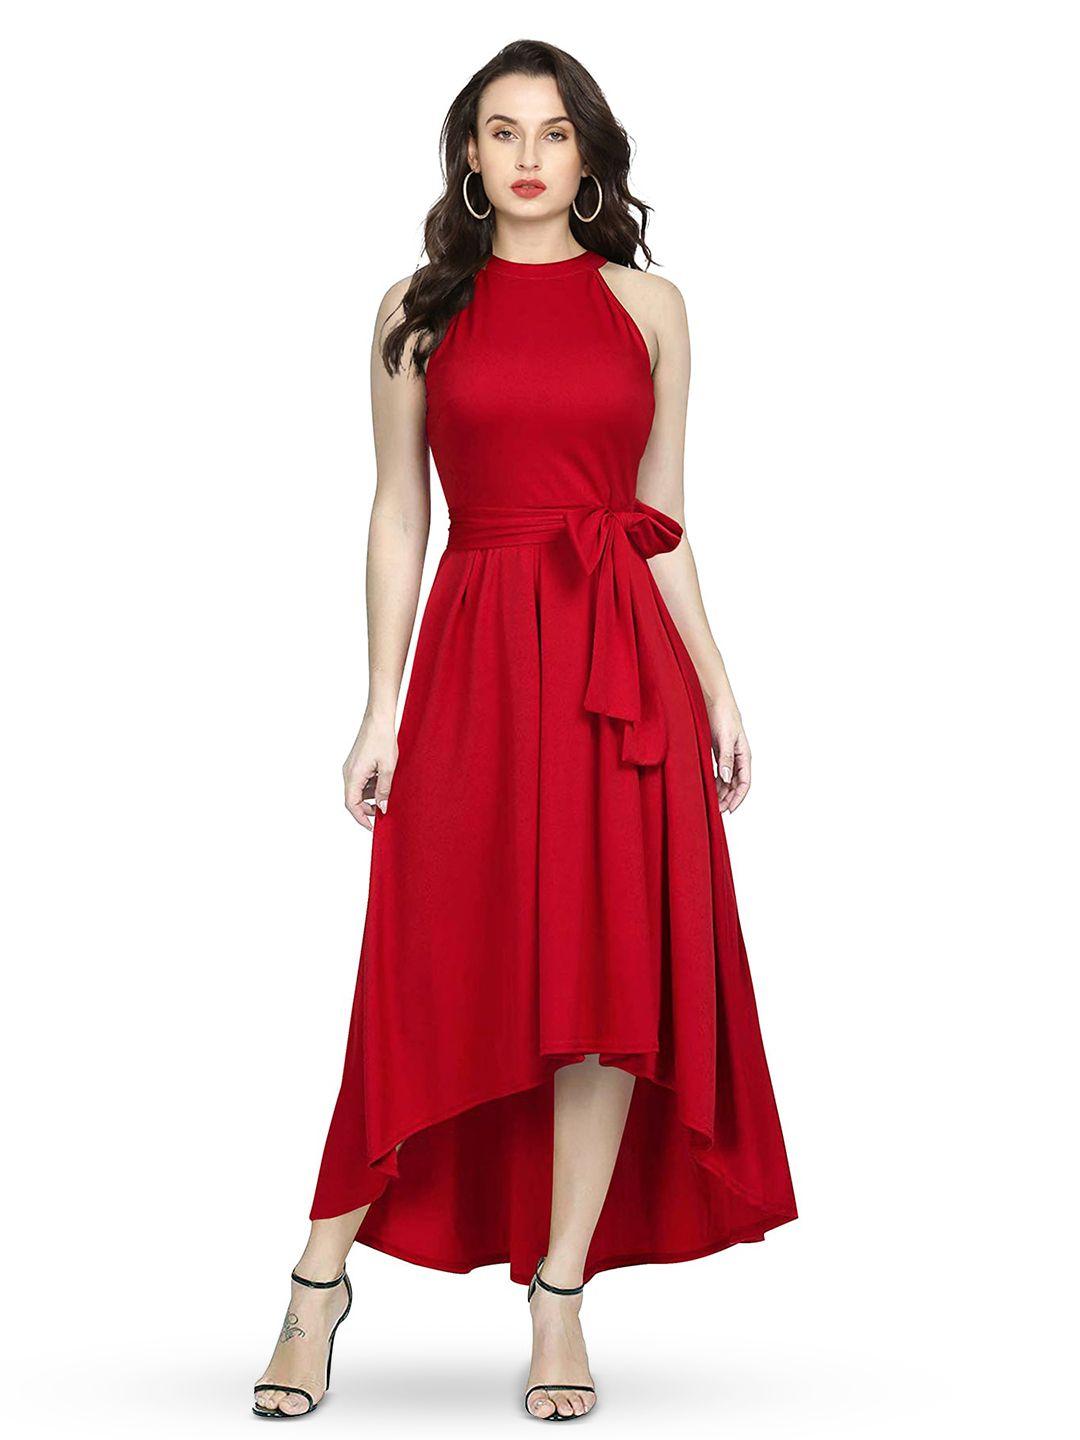 baesd red fit & flare dress